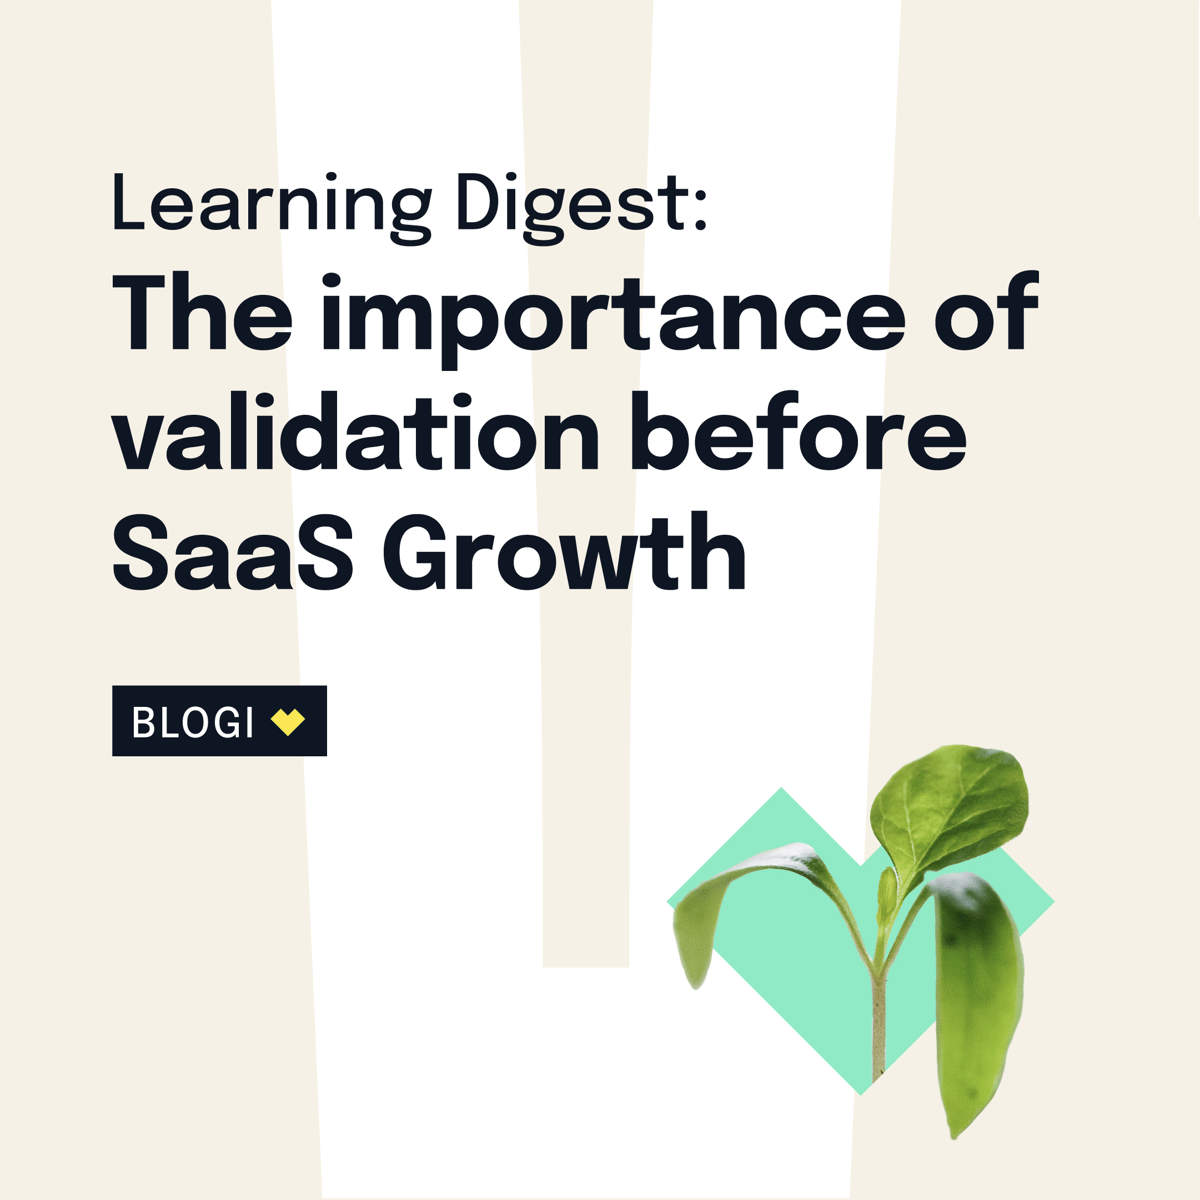 Learning Digest: The importance of validation before SaaS Growth